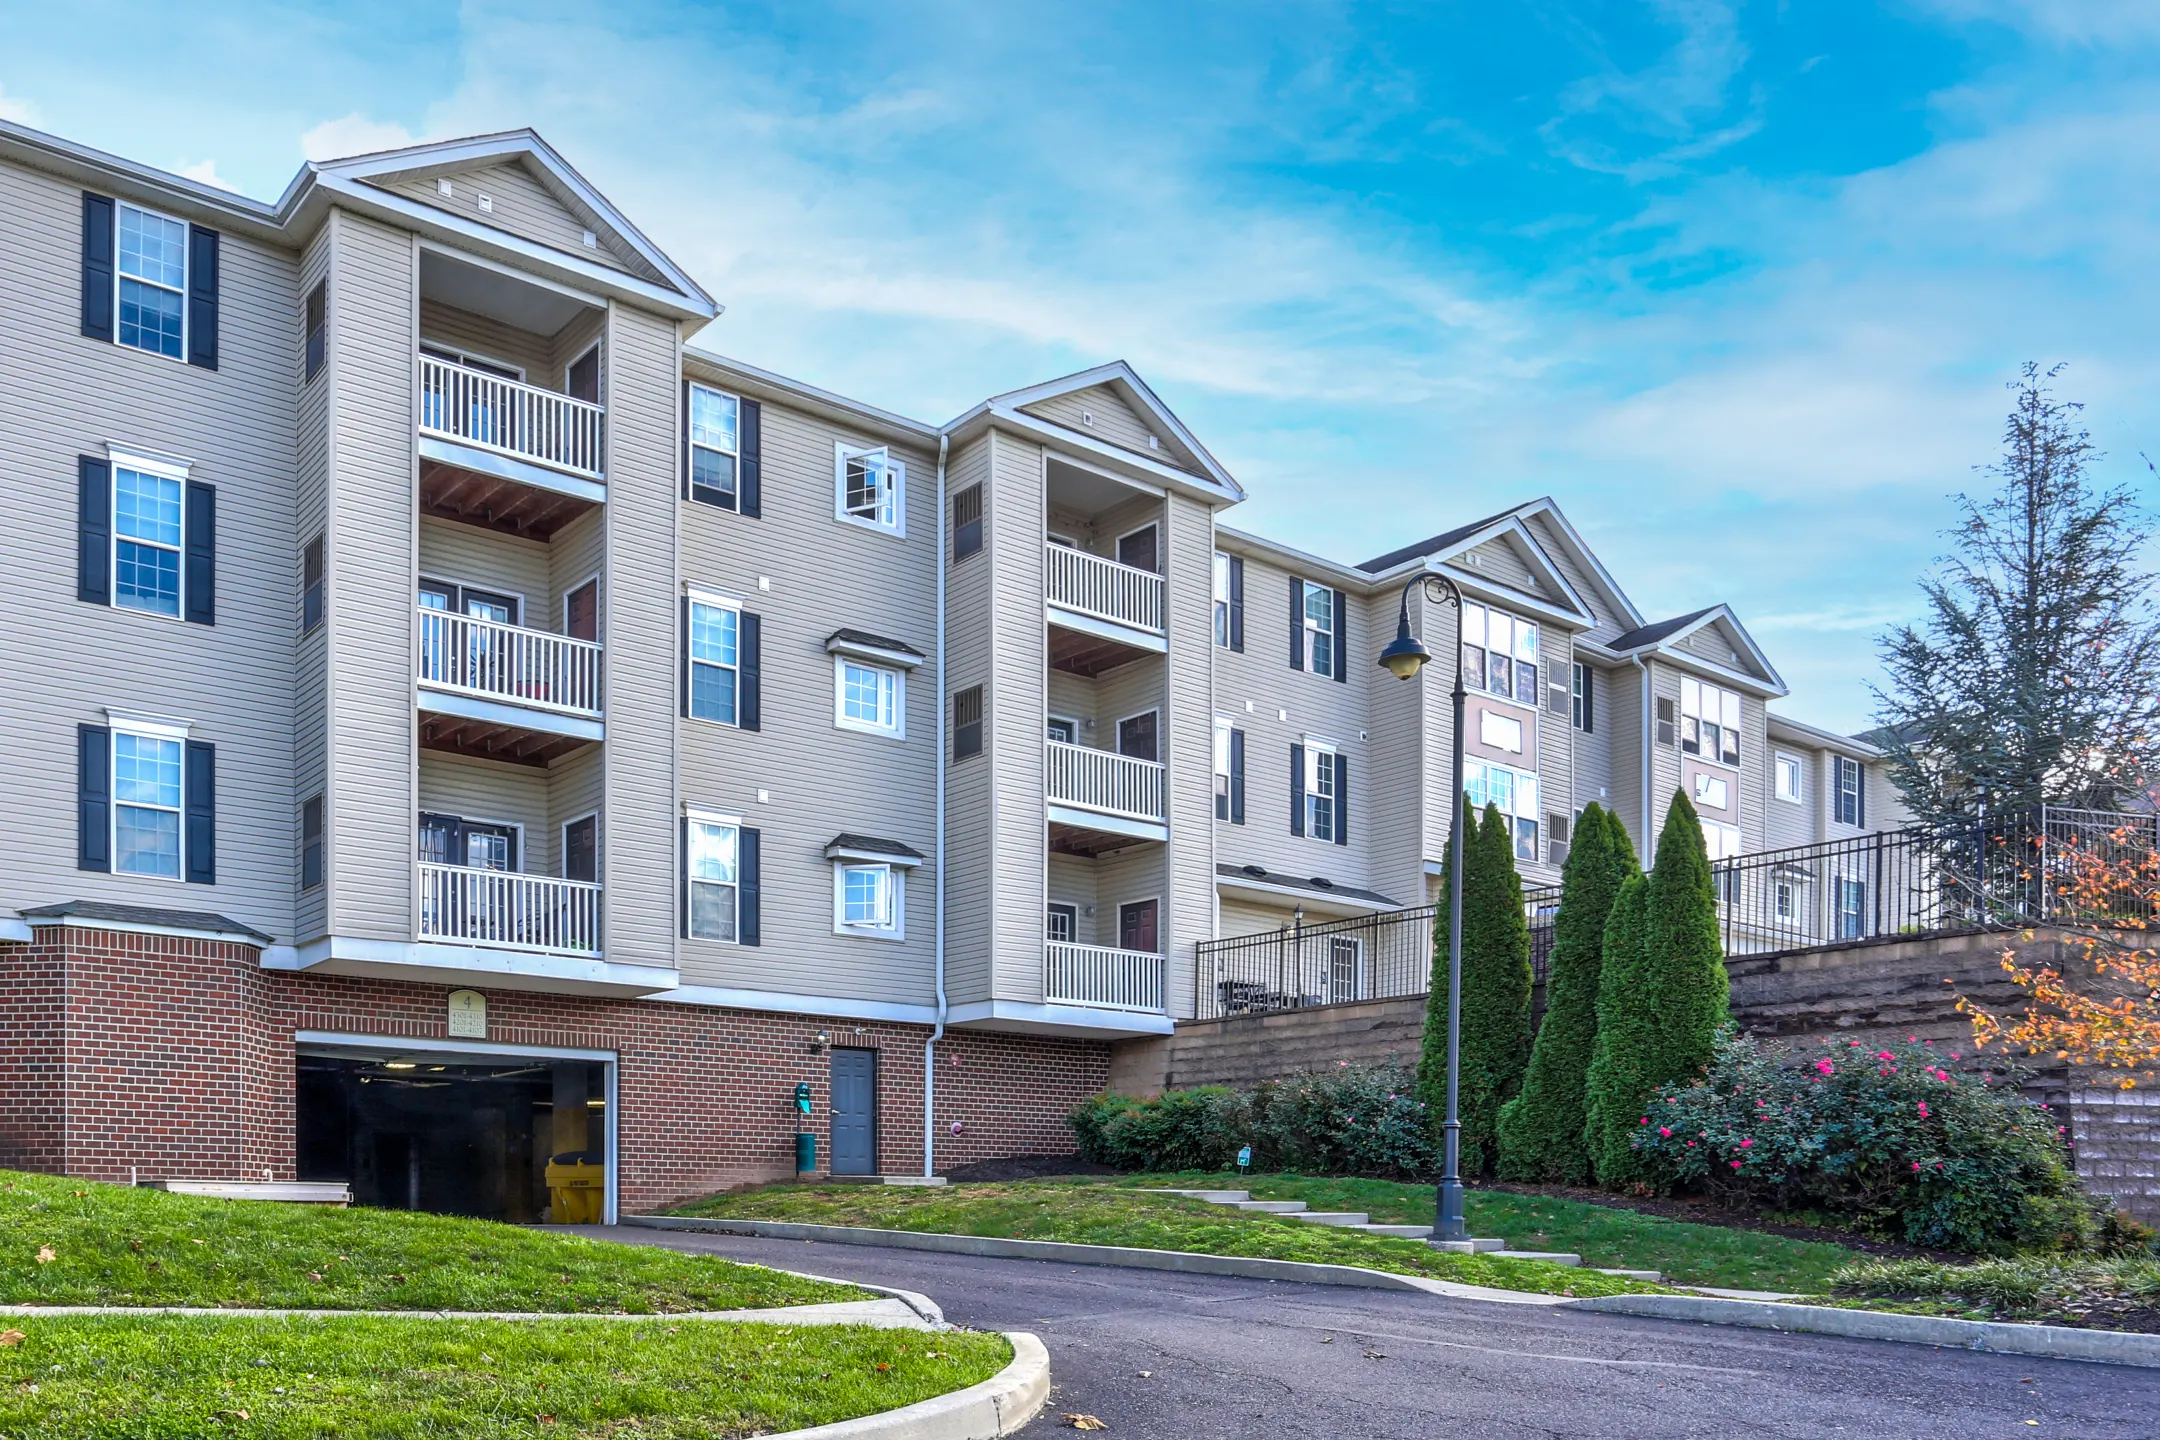 Building - The Pointe At River Glen - Royersford, PA